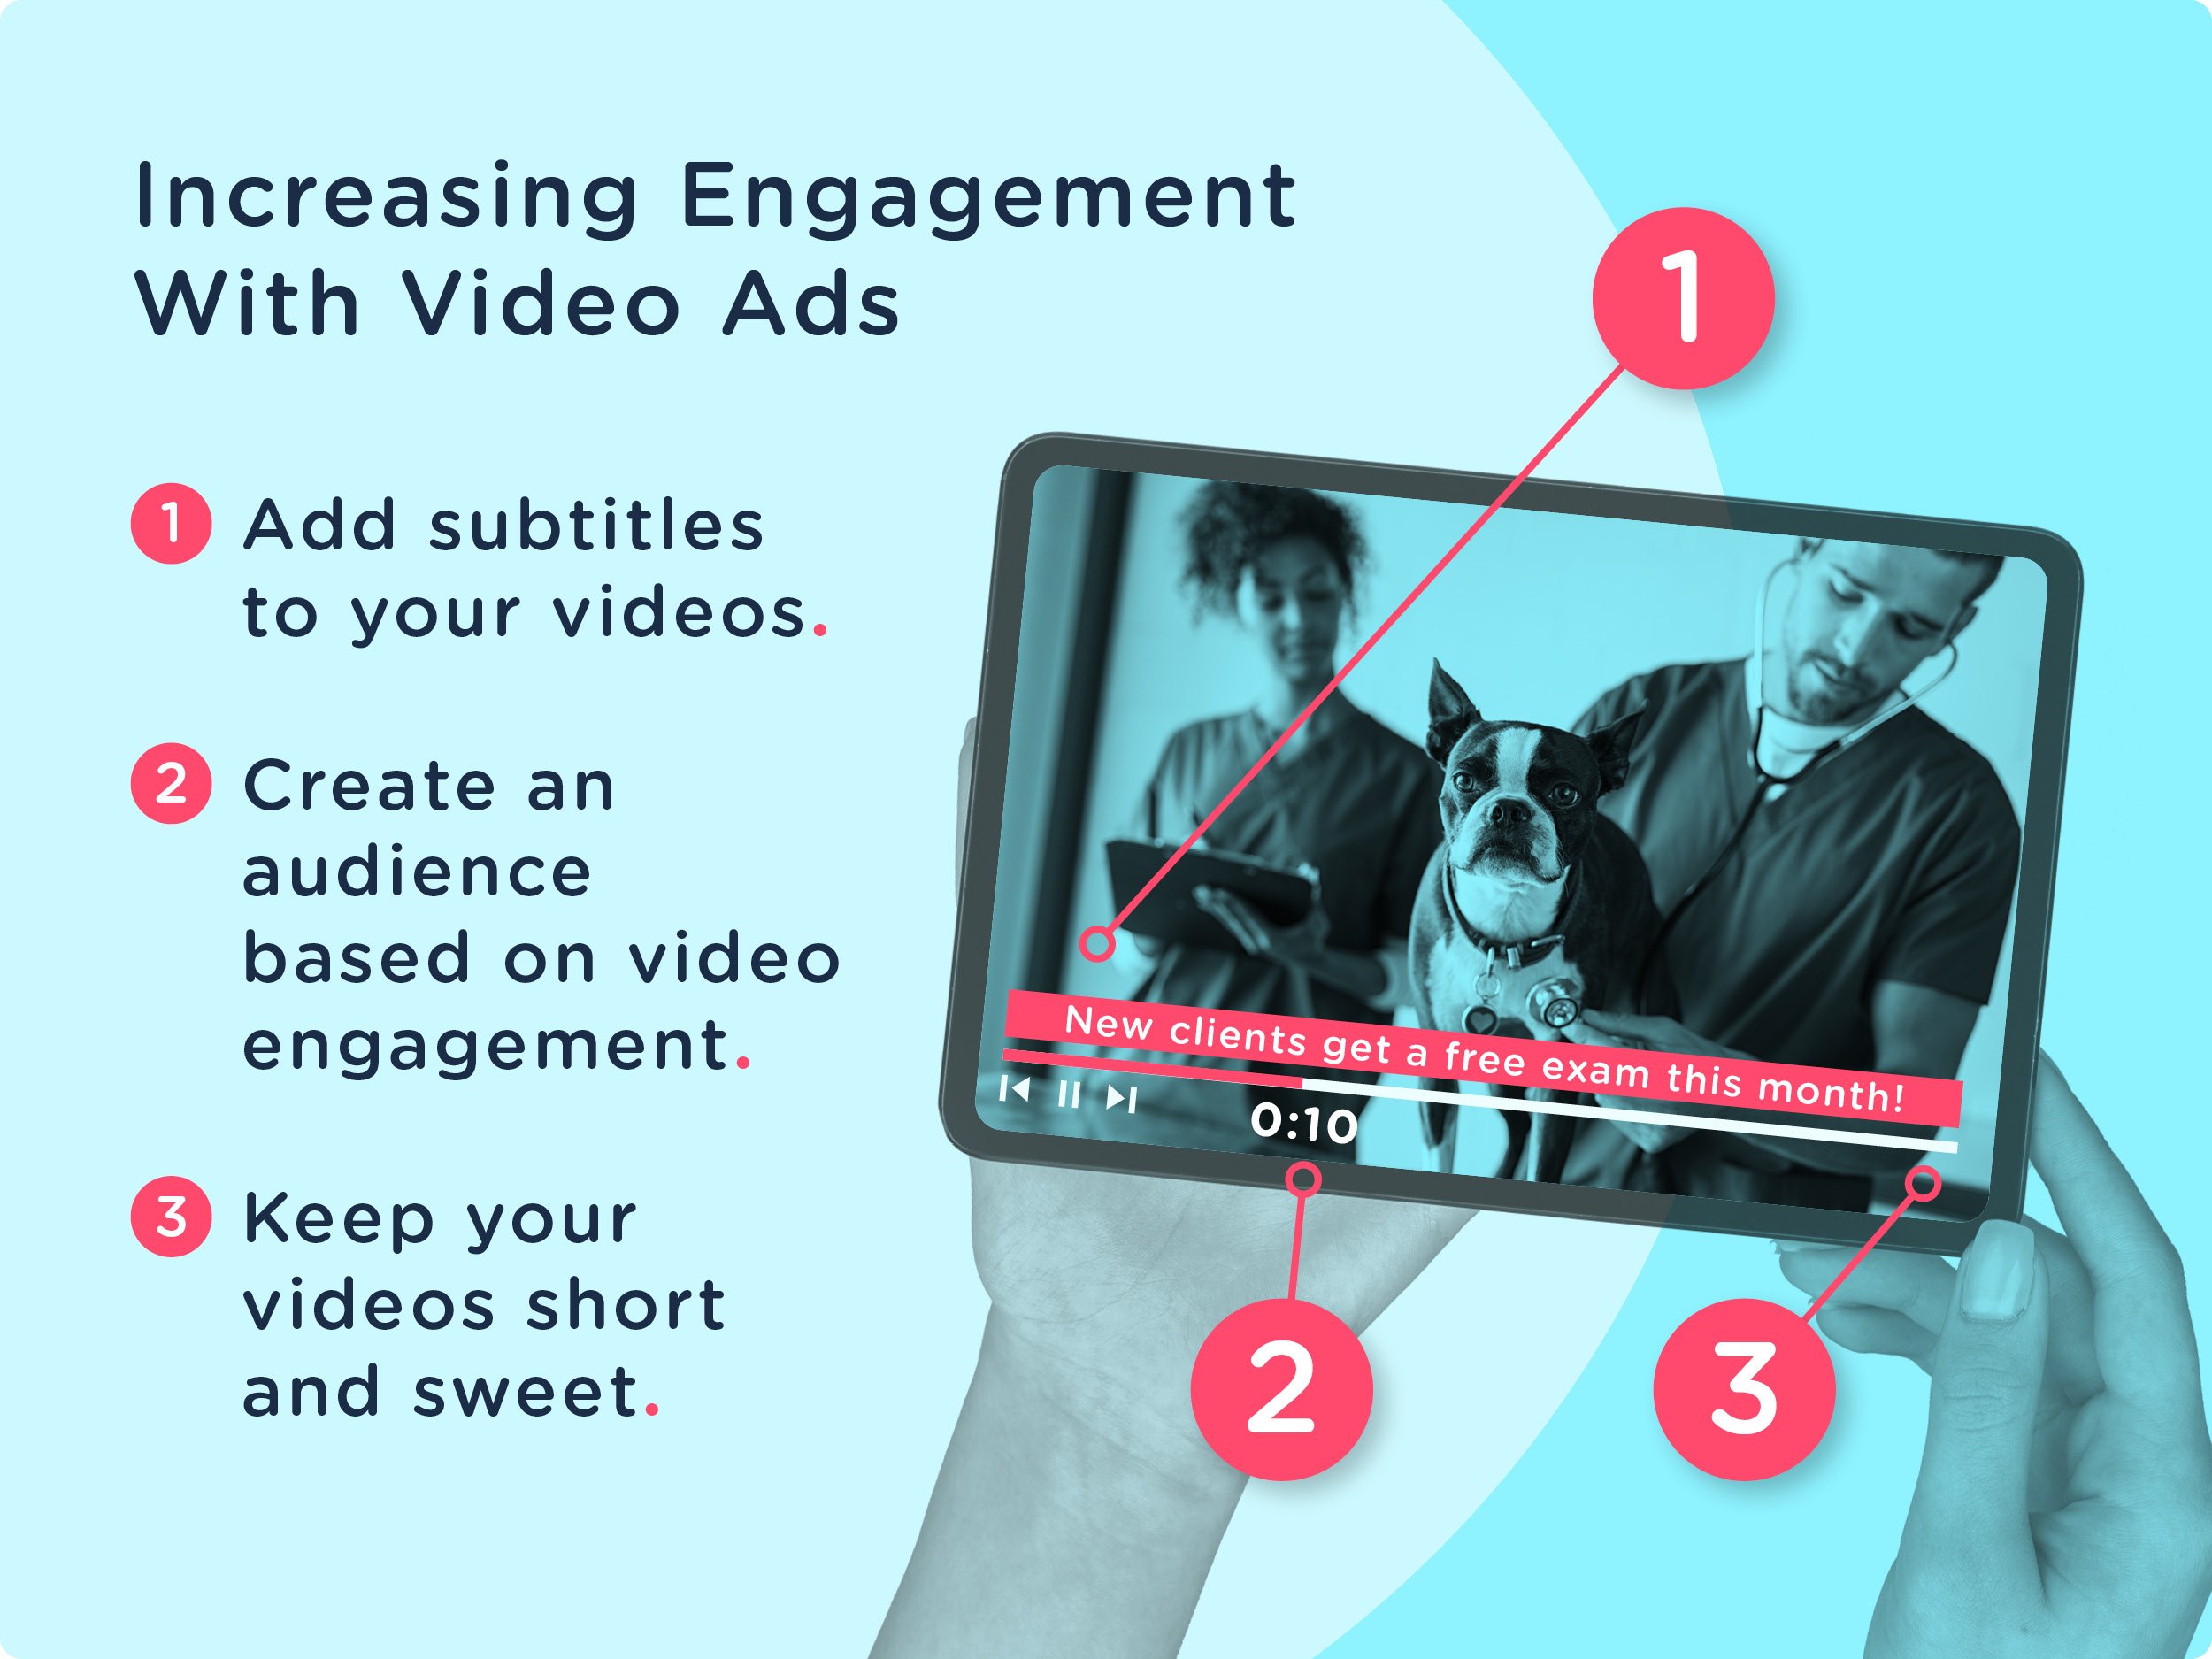 Increasing Engagement with Video Ads